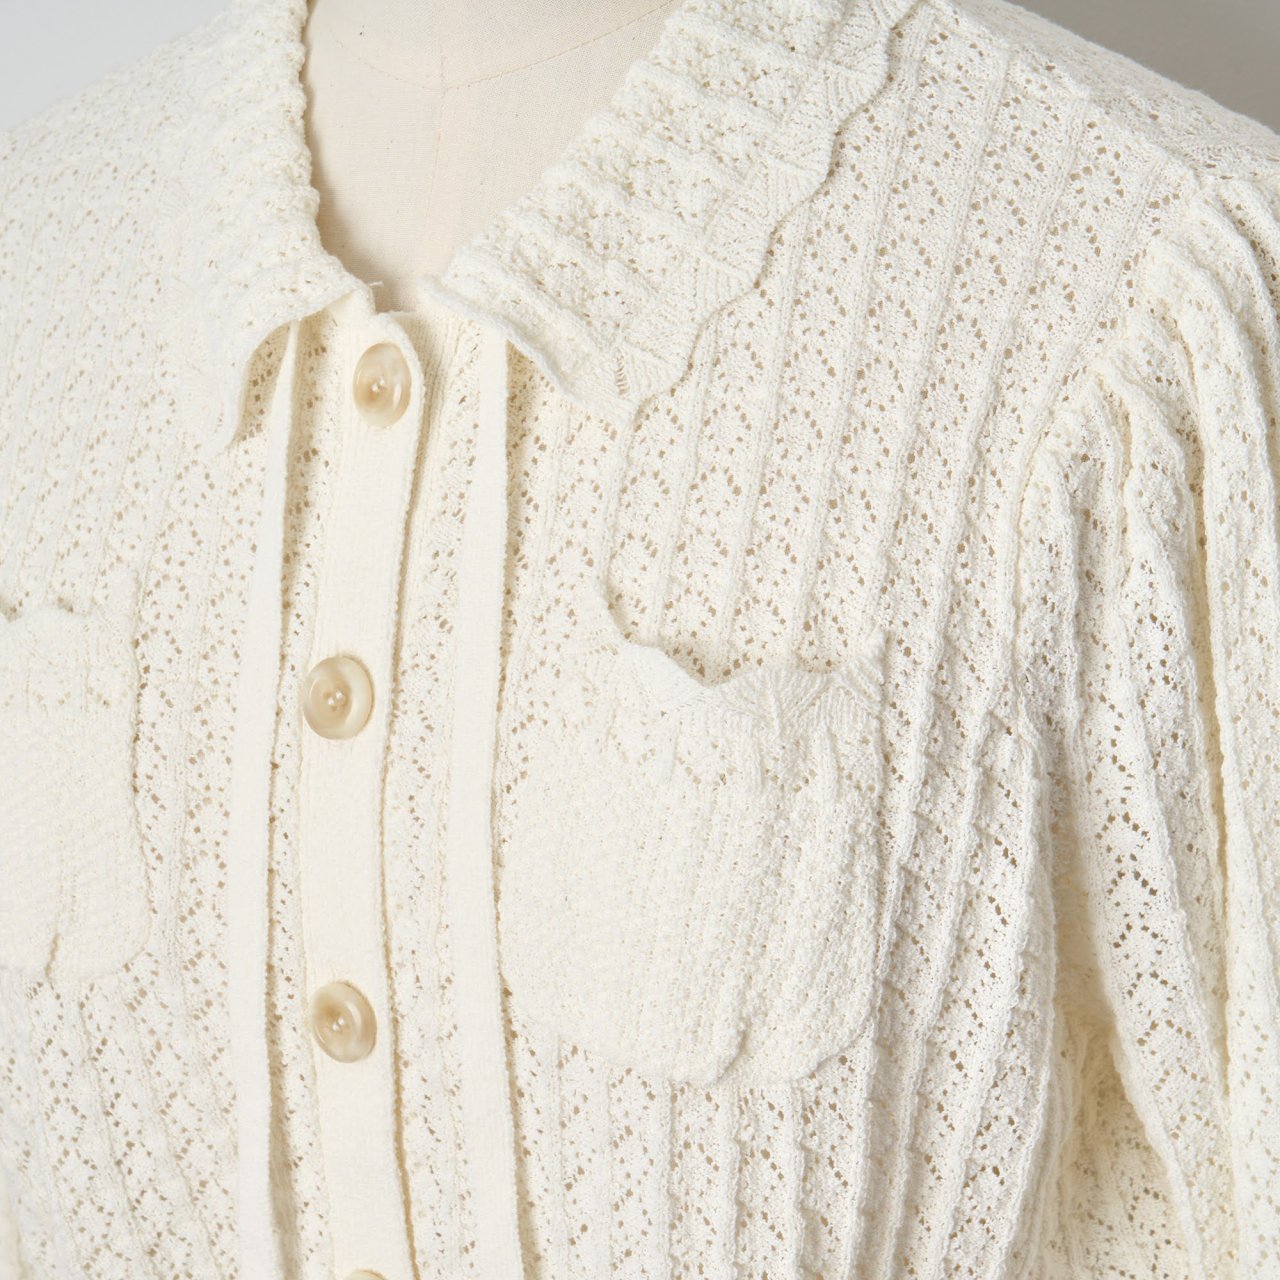 Pale jute classical race knit | www.causus.be